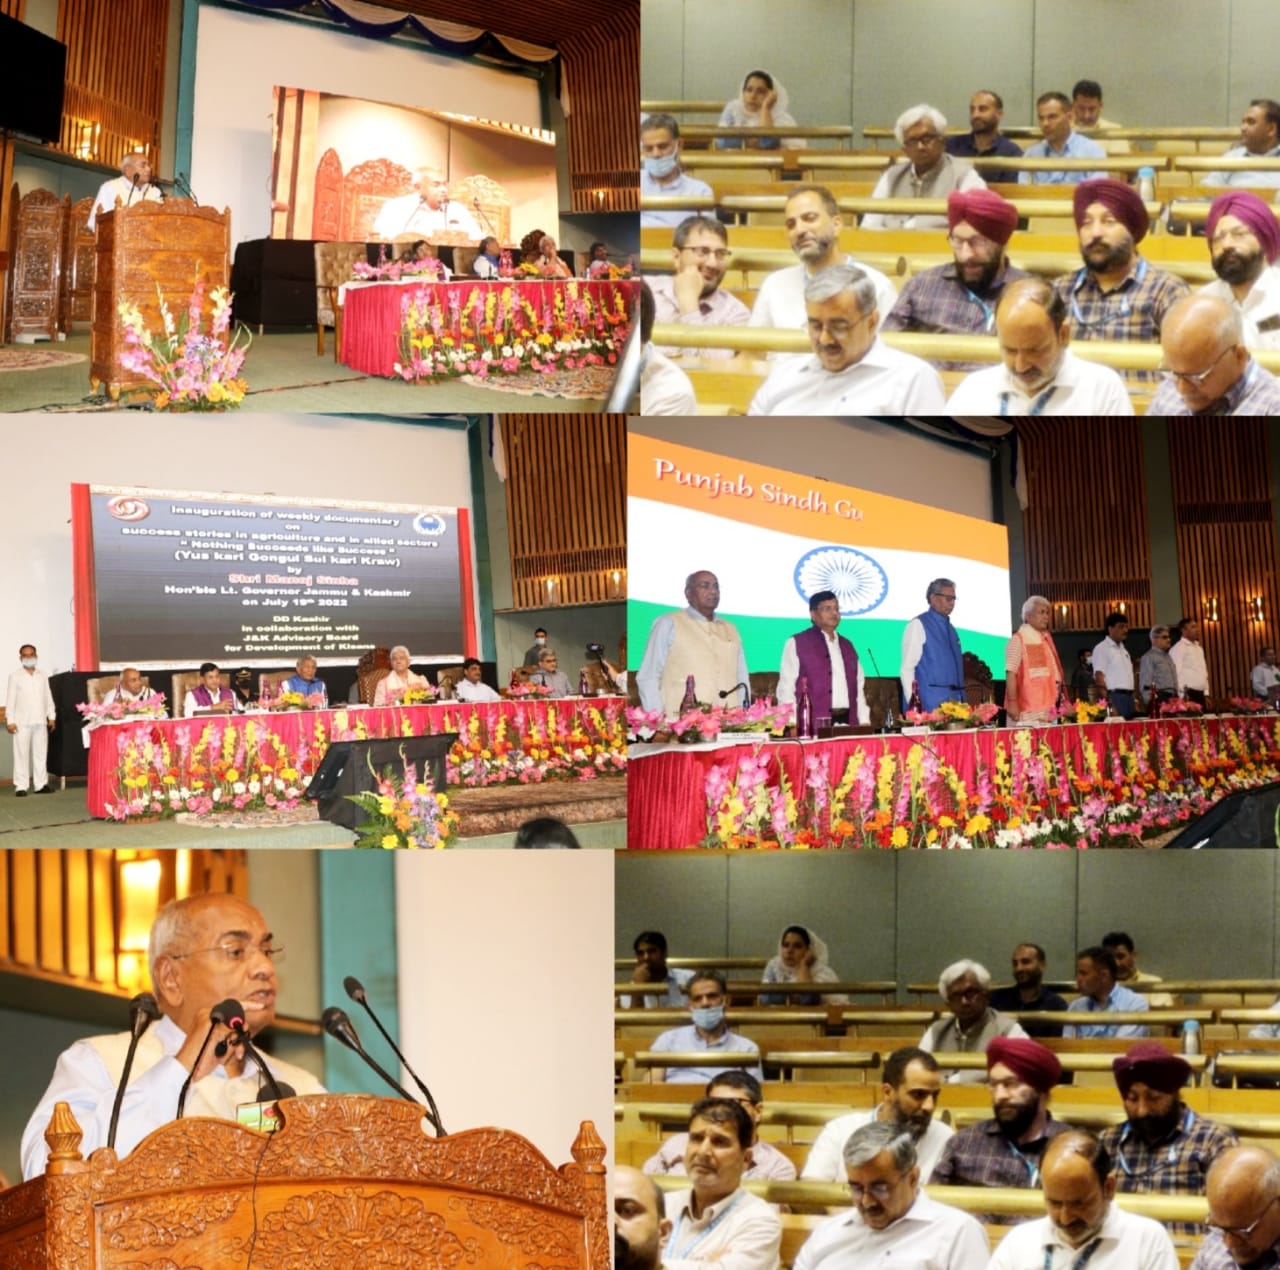 'A two-day conference regarding Holistic Agriculture Development of J&K was organised by the Department of Agriculture J&K'